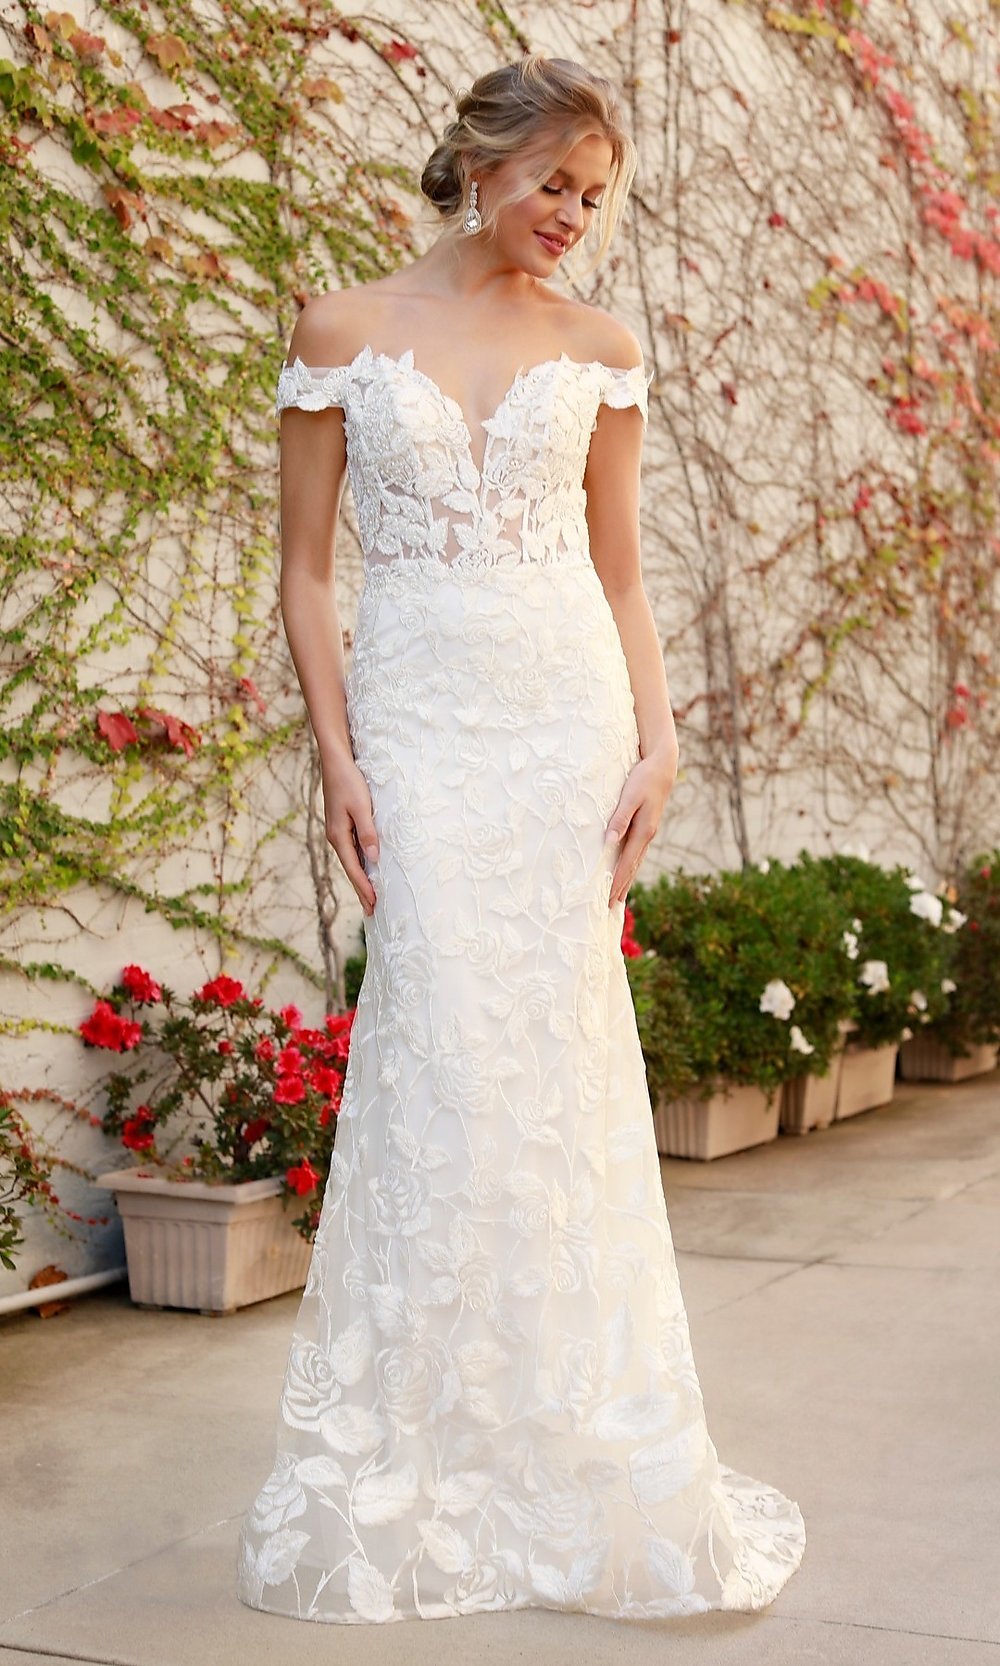 White Off-Shoulder Long Embroidered White Wedding Dress